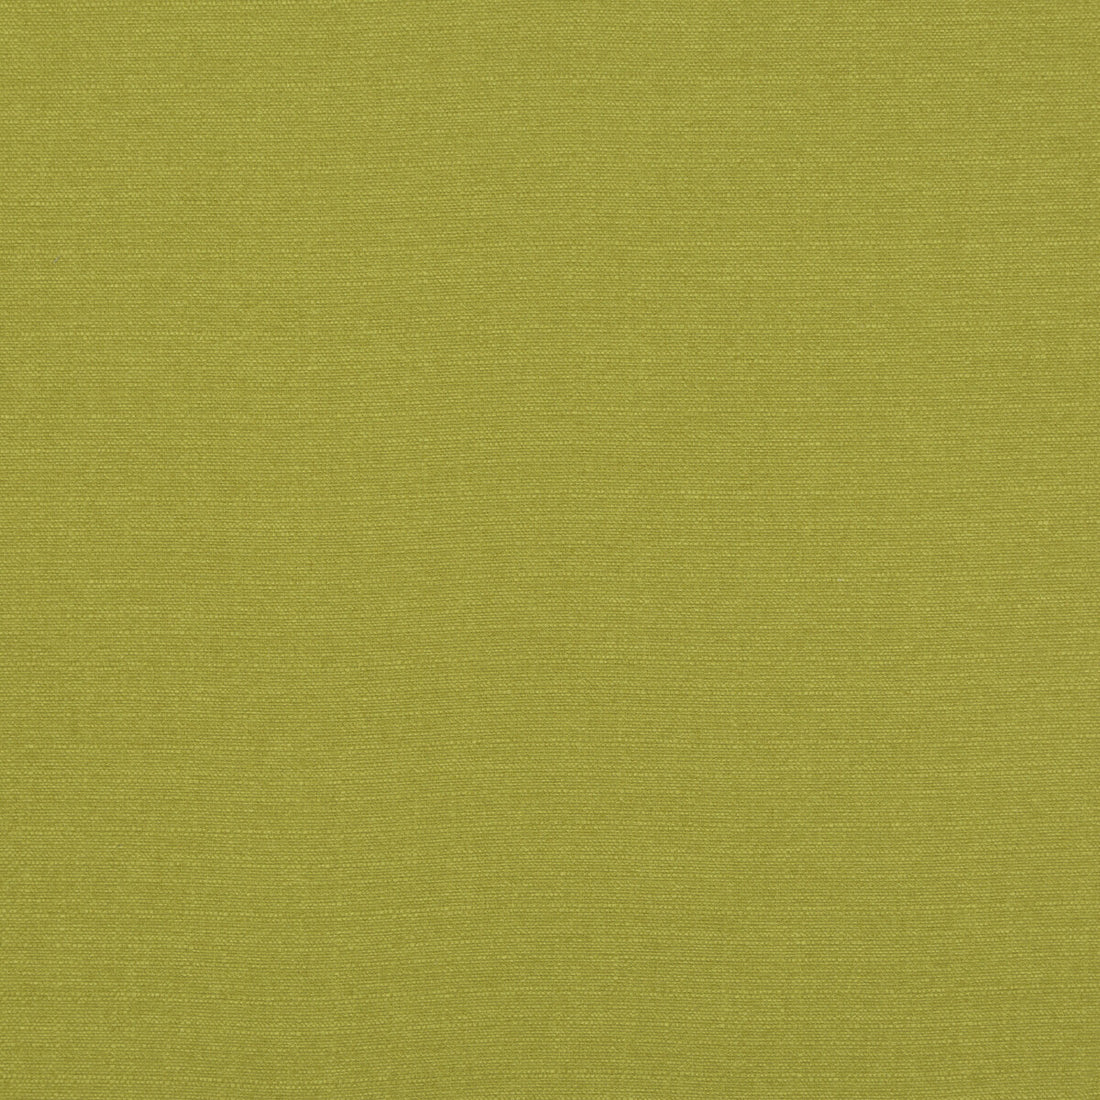 Lansdowne fabric in lime color - pattern PF50413.755.0 - by Baker Lifestyle in the Notebooks collection